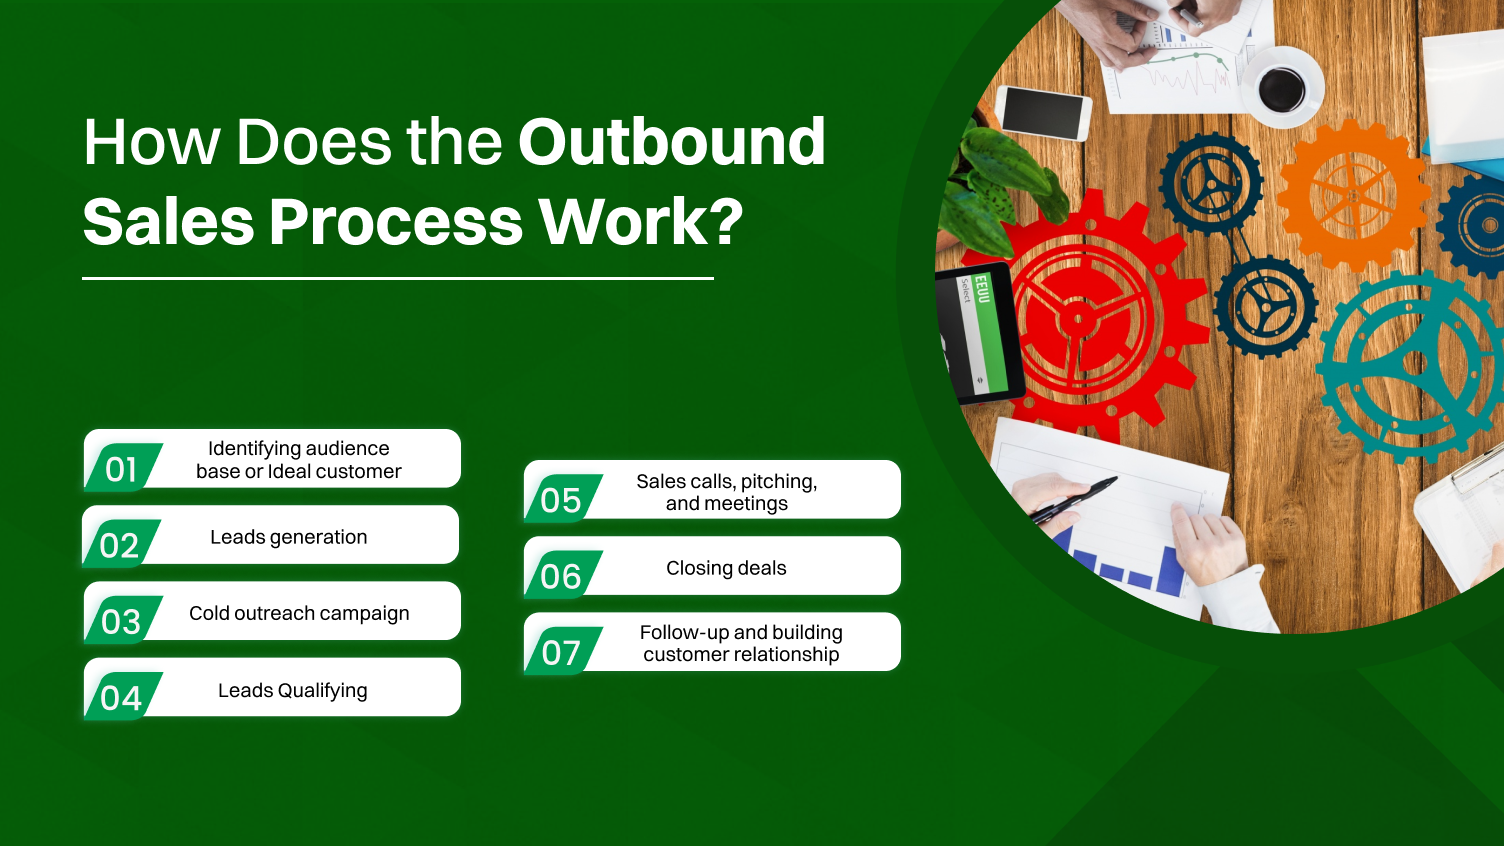 How does the outbound sales process work?